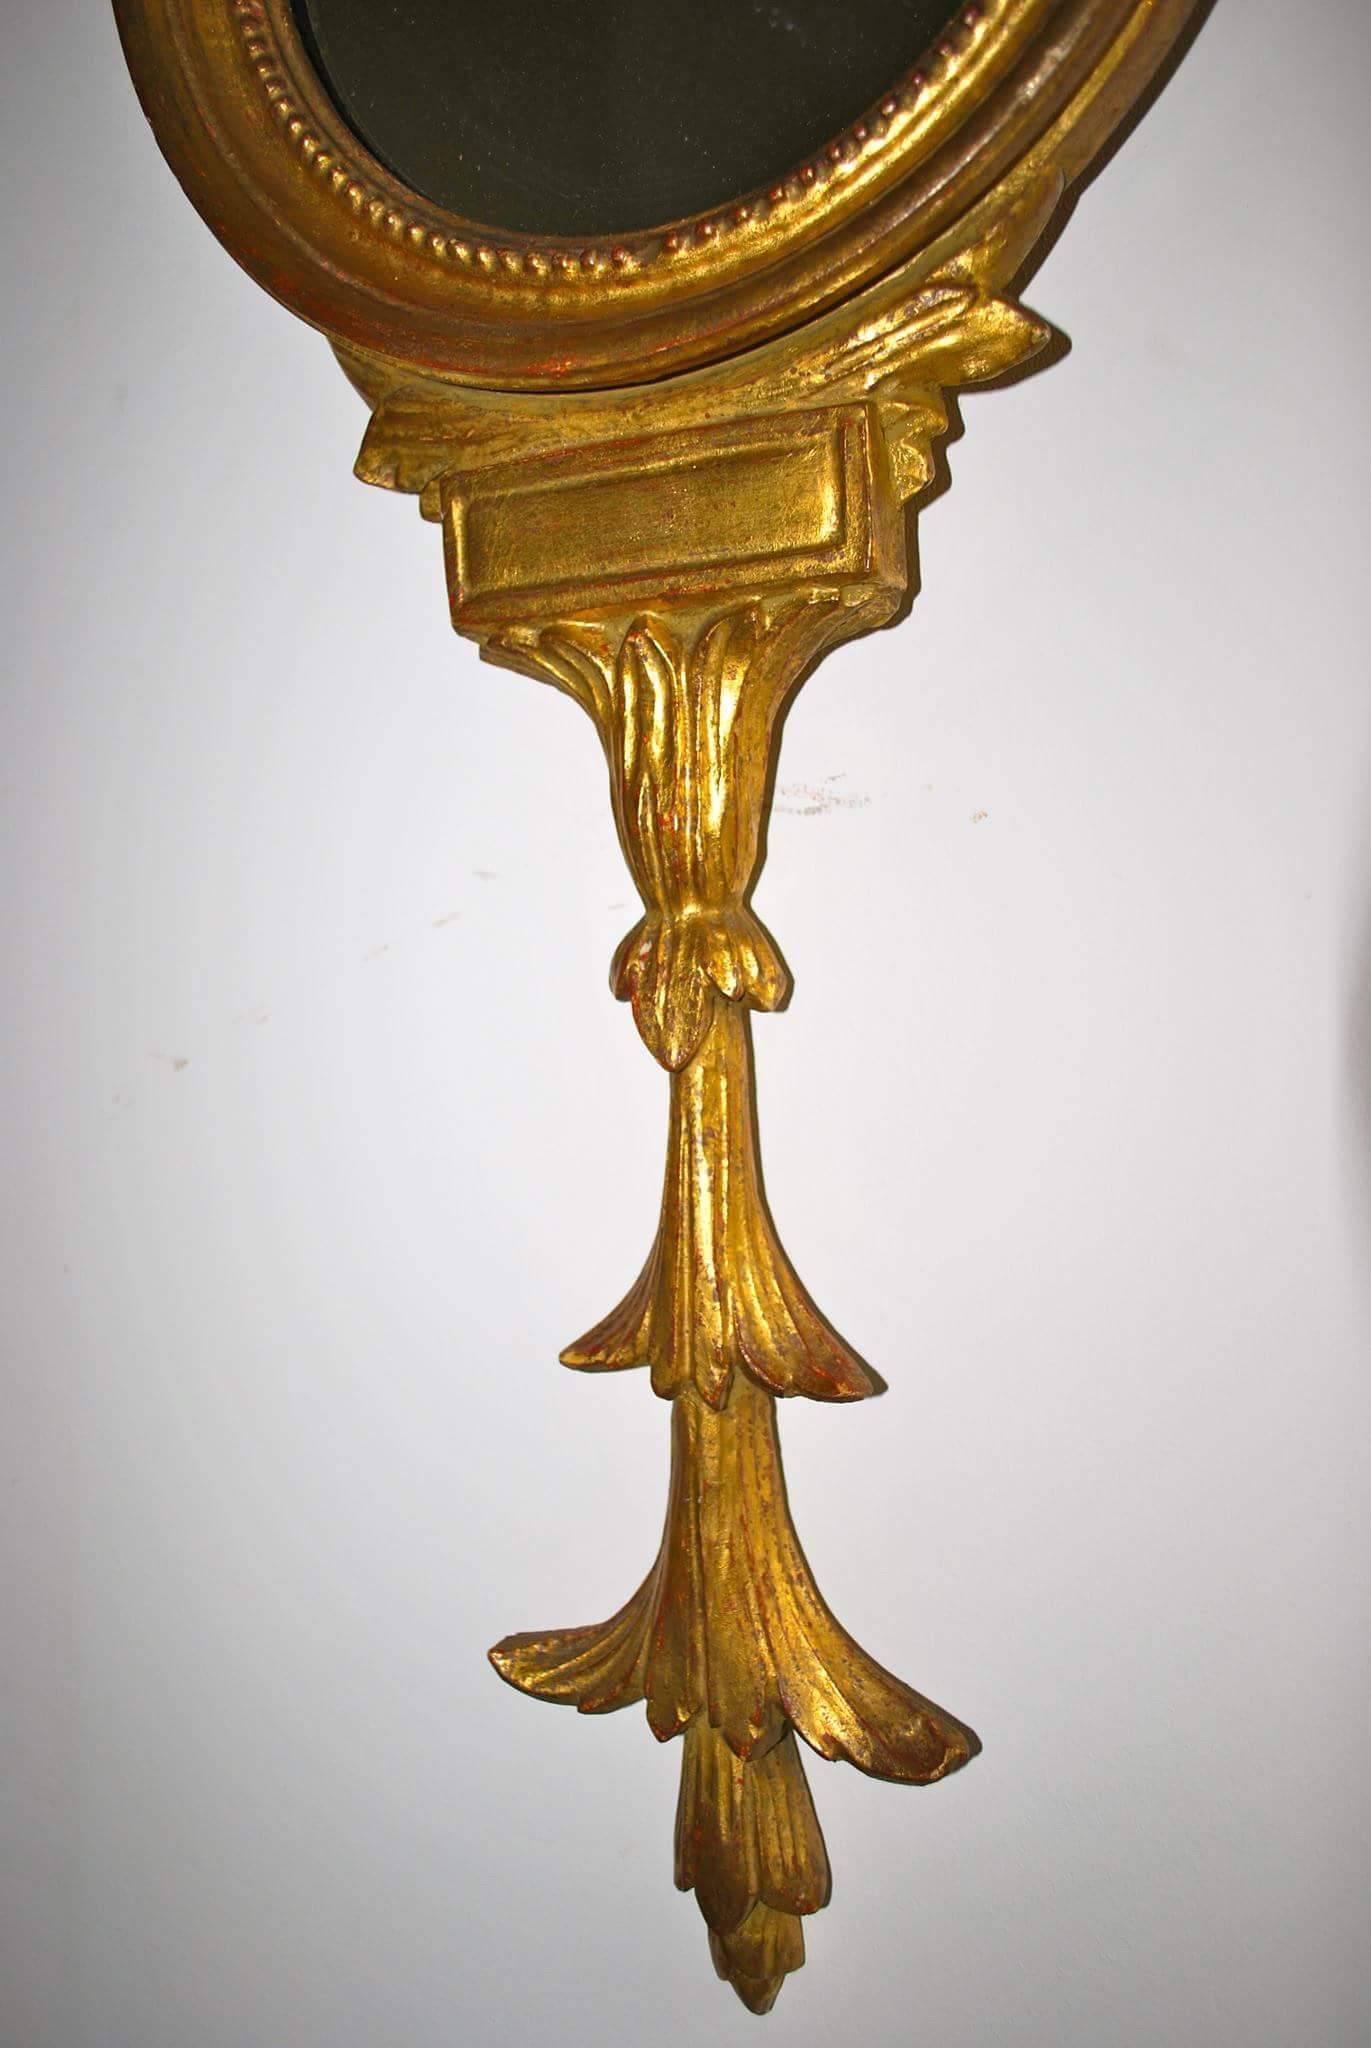 English 19th Century Giltwood Wall Mirror with an Eagle Crest